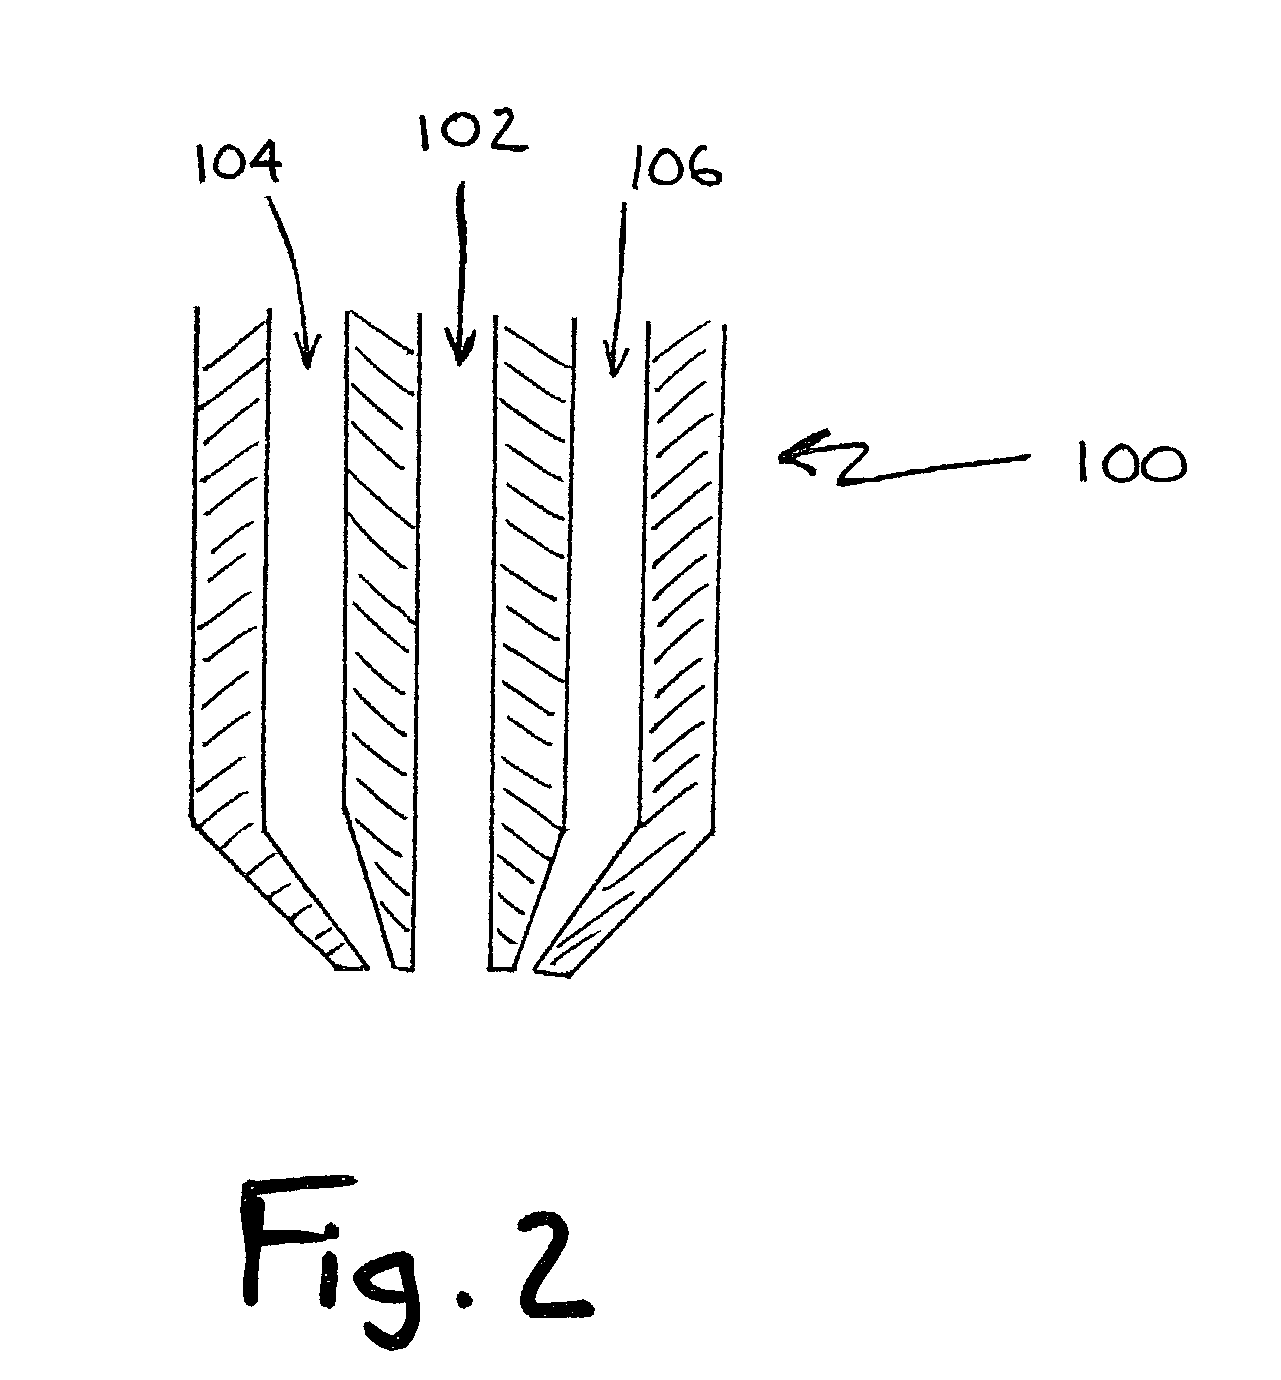 Membrane electrode assemblies for use in fuel cells